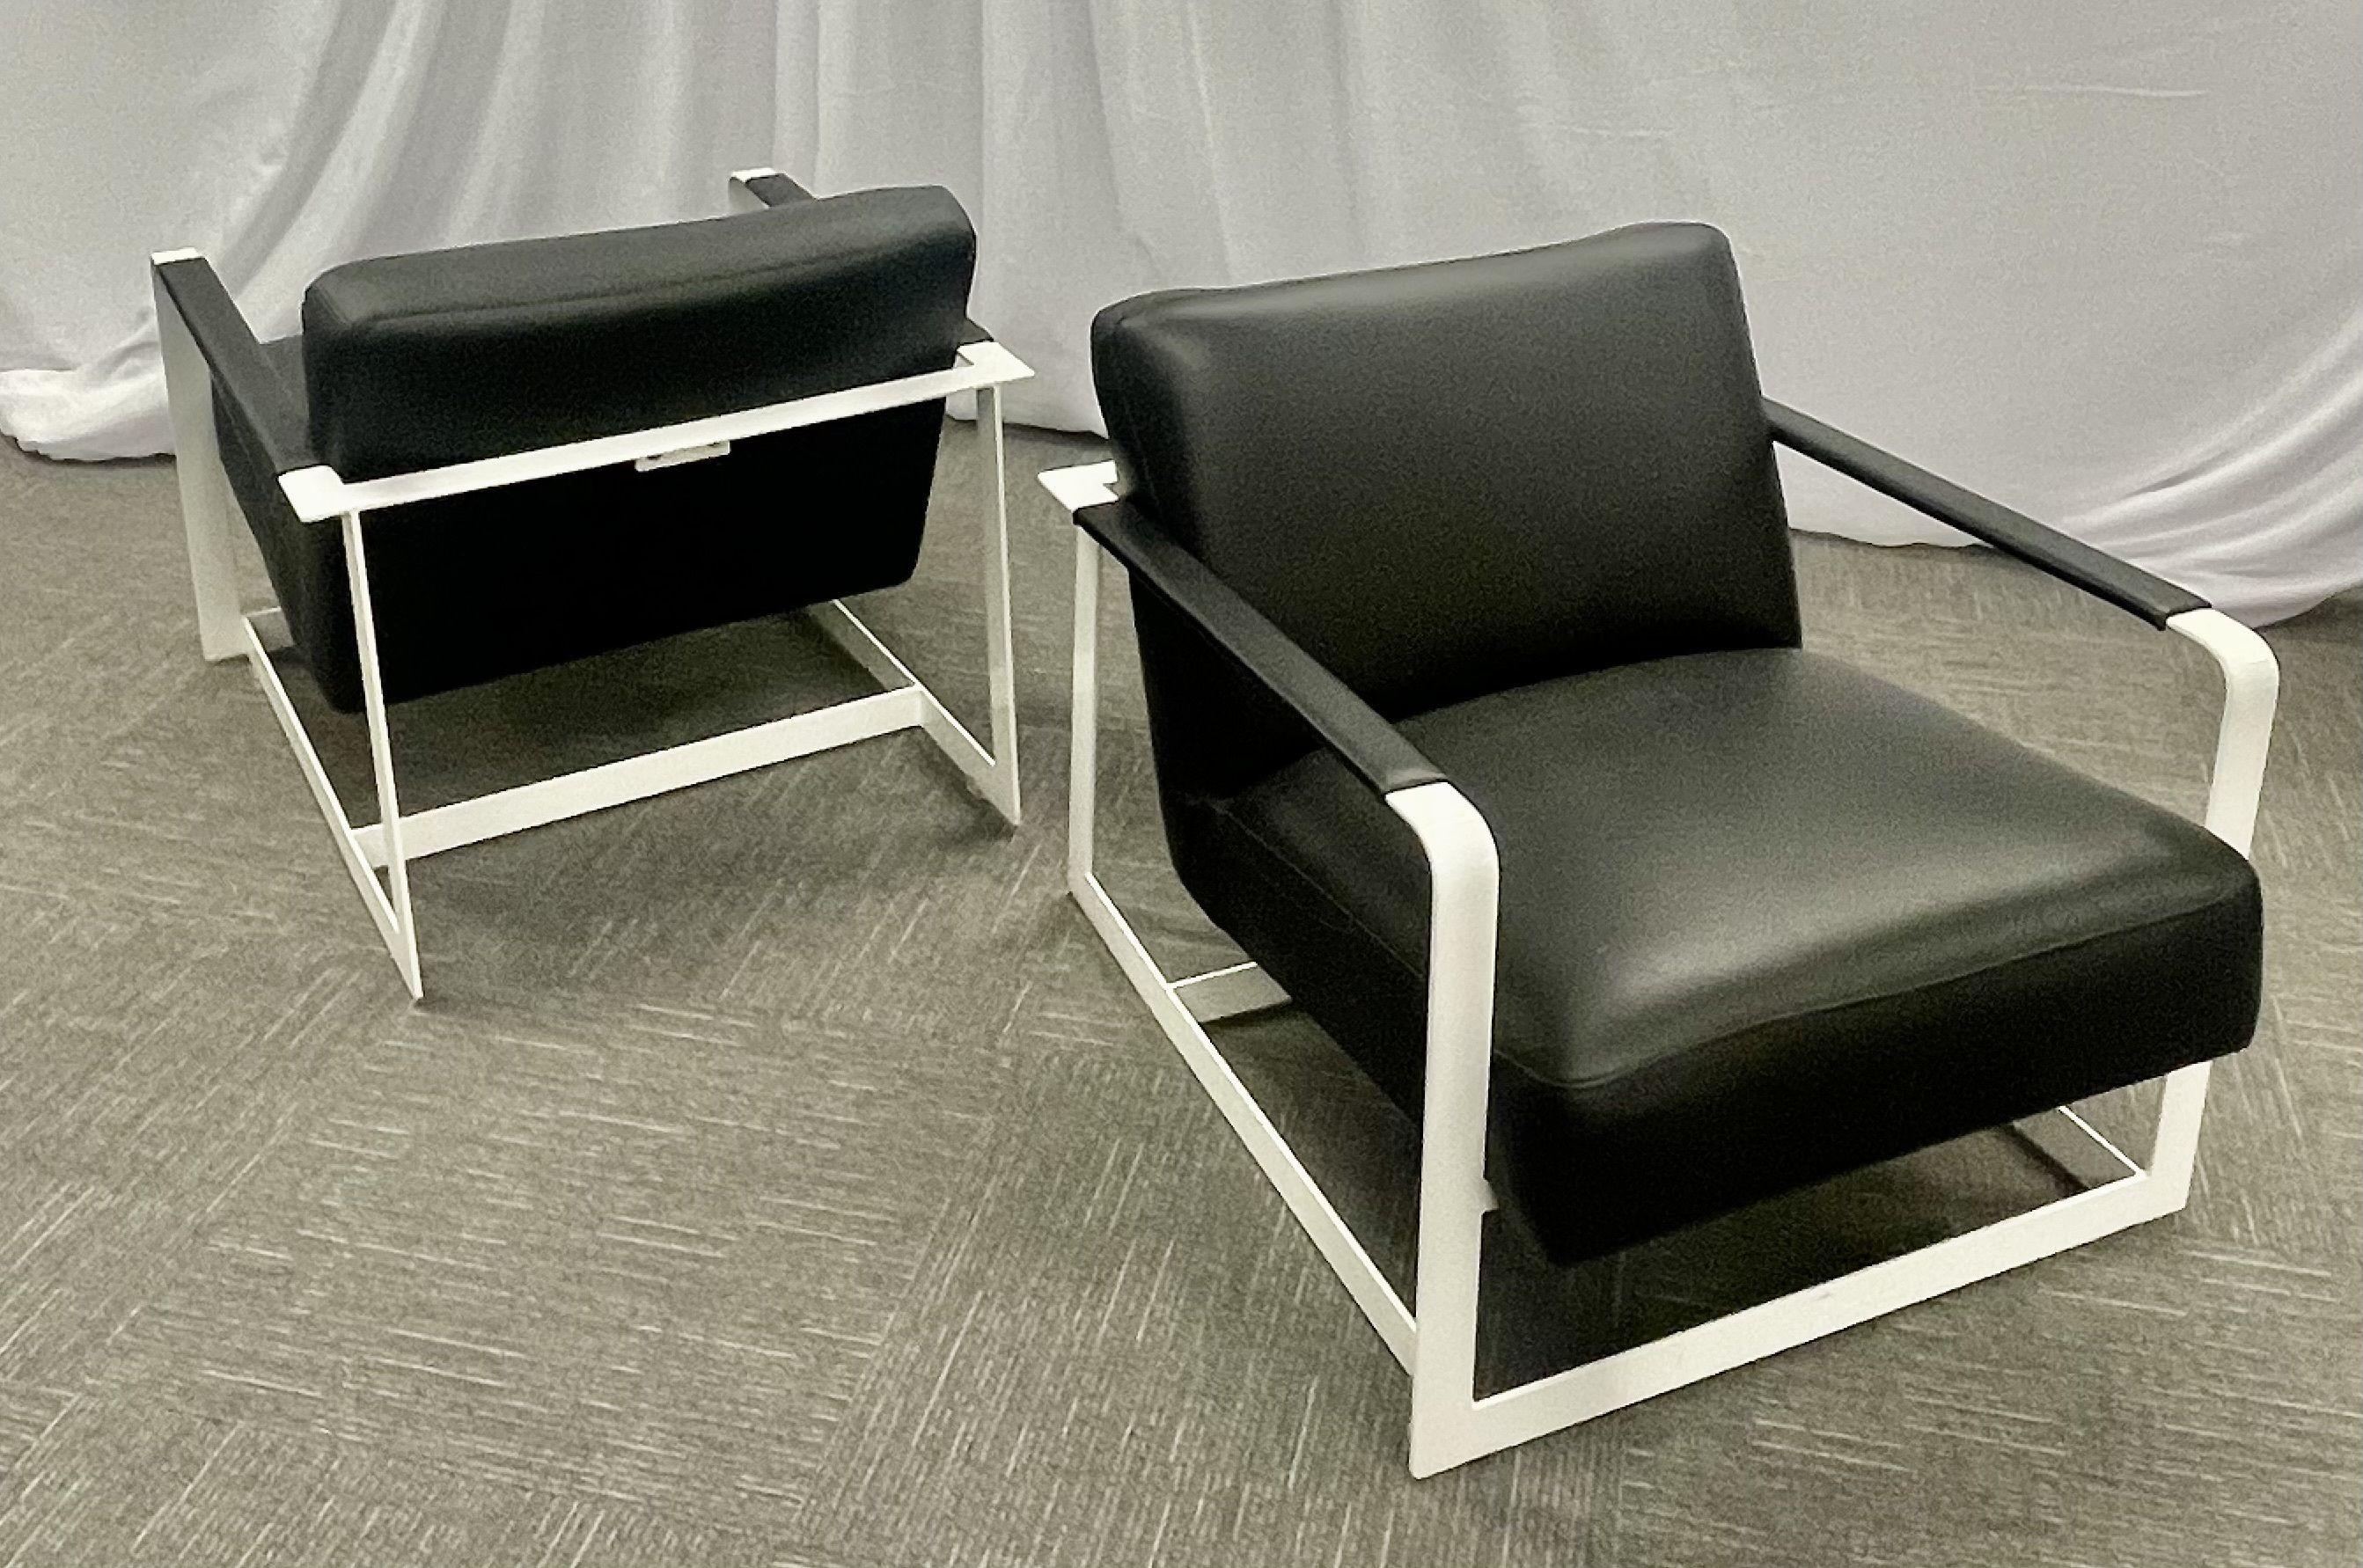 Pair of Mid-Century Modern Lounge Chairs, Leather, Steel Base, American, 1980s For Sale 3